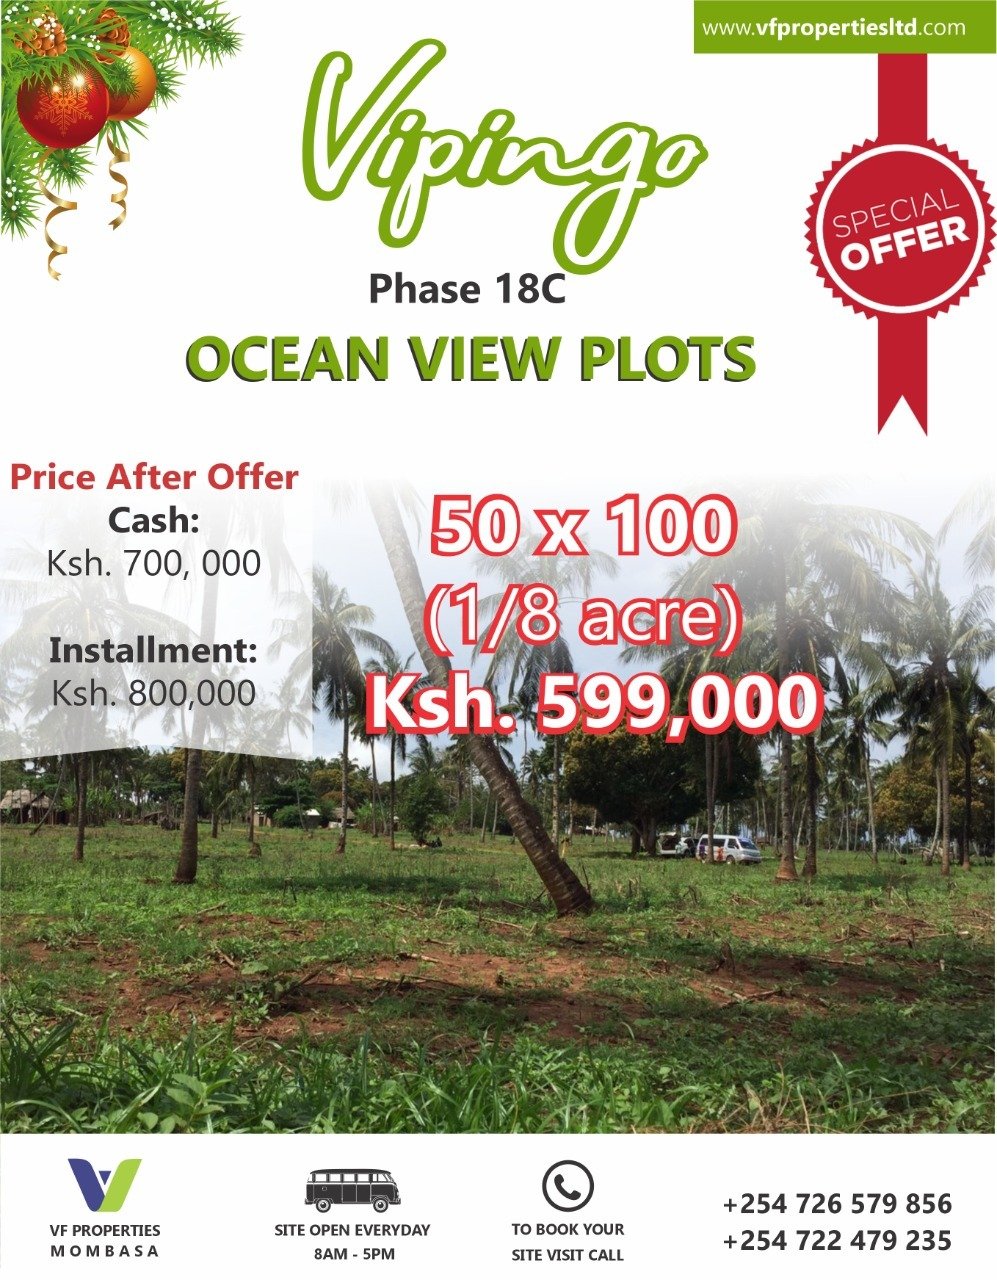 Phase 18C plots with Ocean View - SOLD OUT